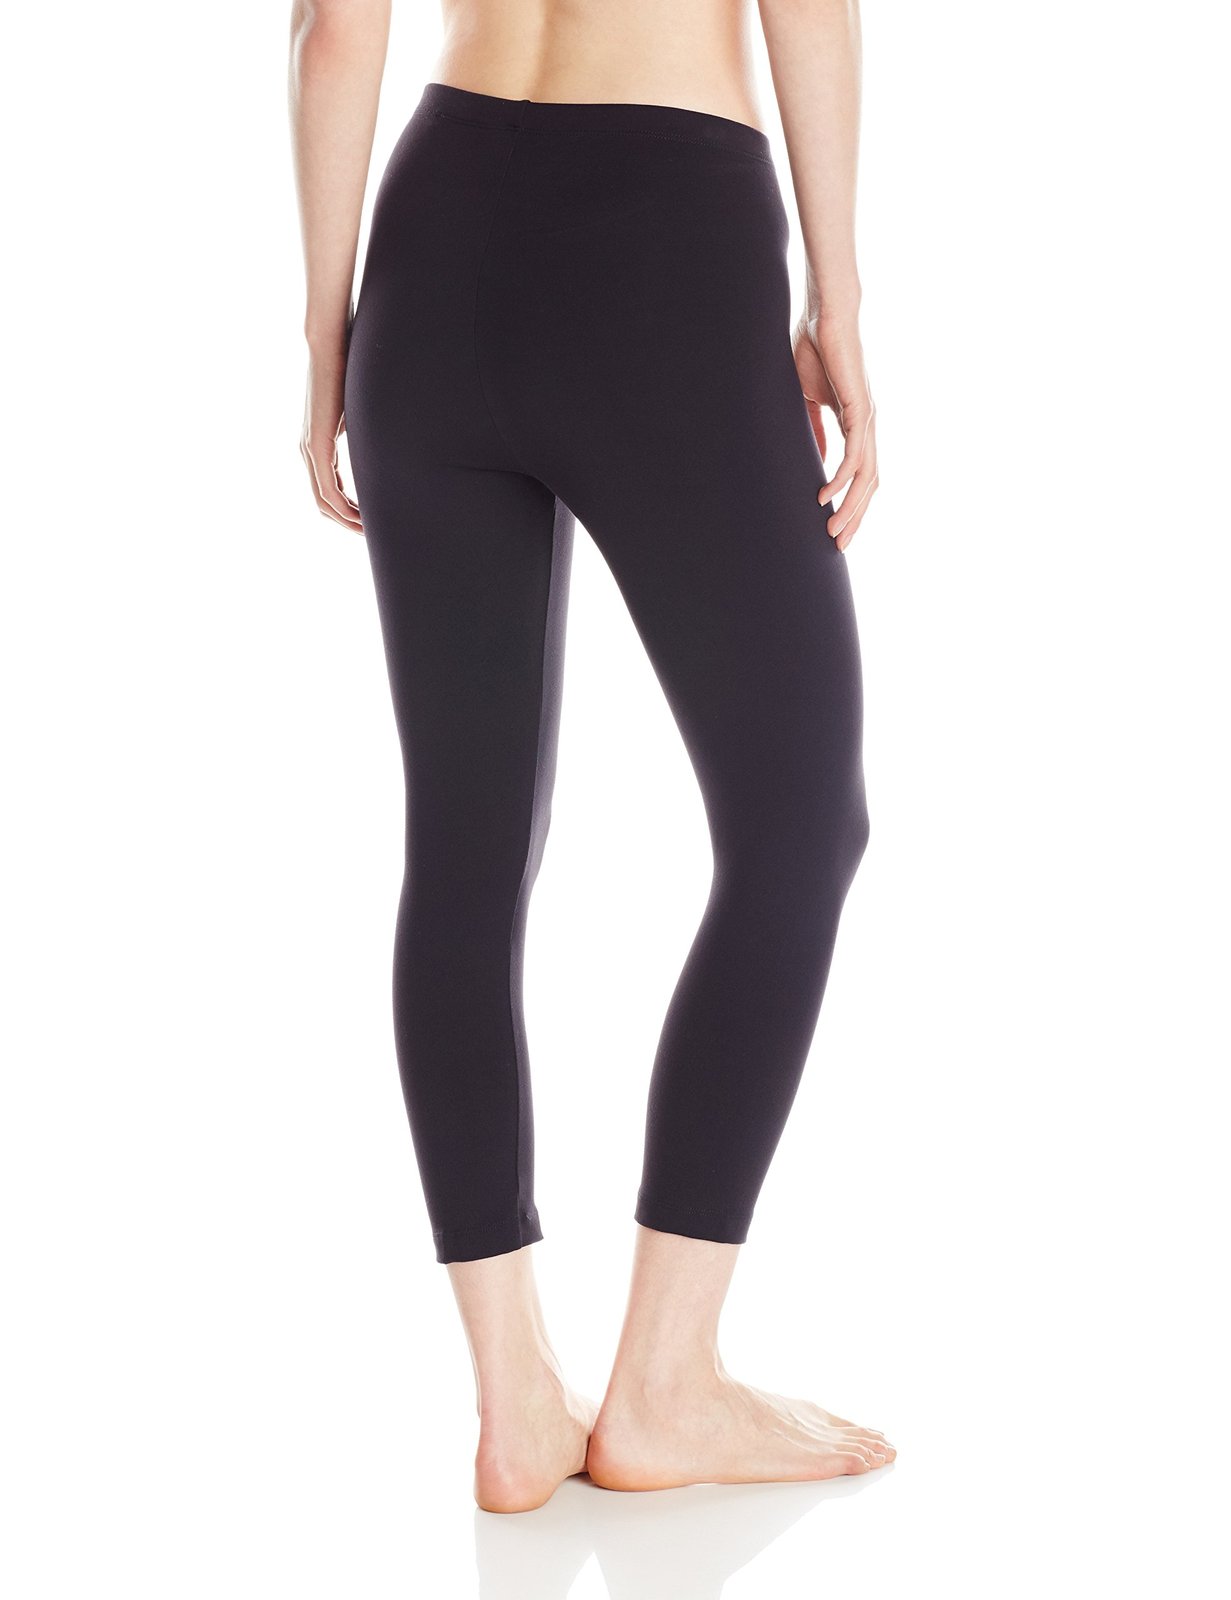 supplex capri legging, supplex capri legging Suppliers and Manufacturers at